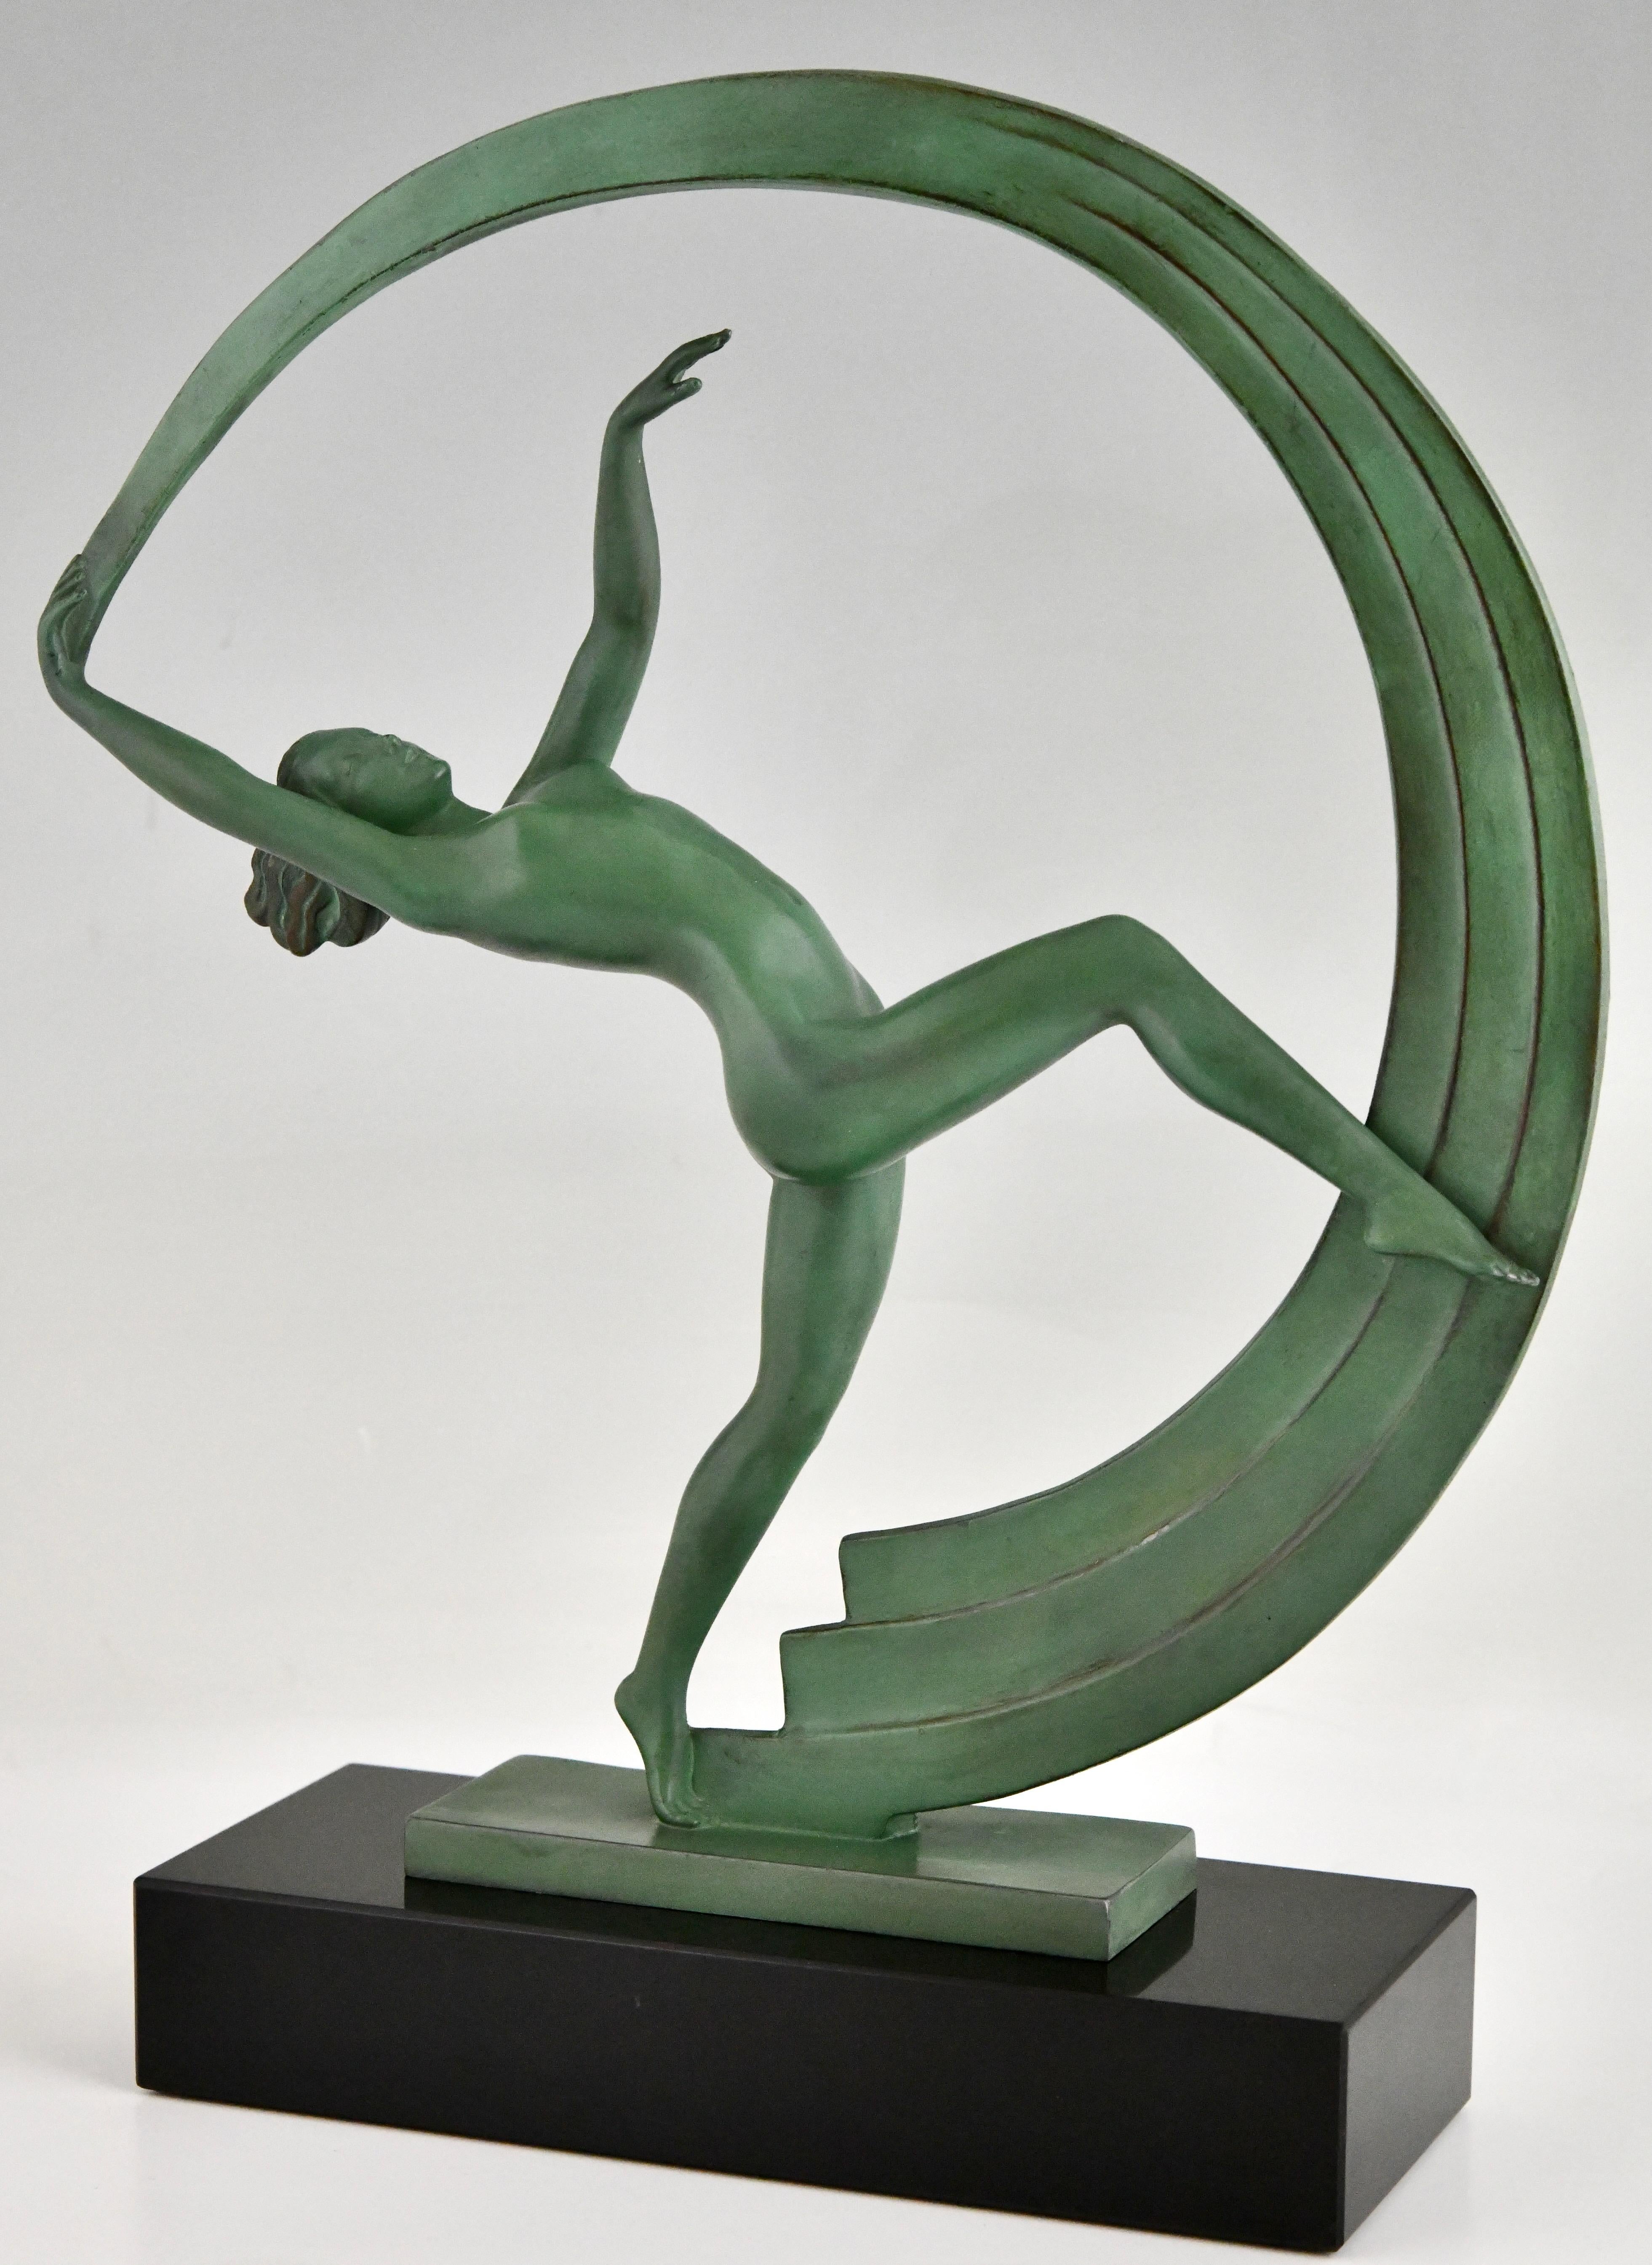 Art Deco sculpture nude dancer with scarf Bacchanale by Janle for Max Le Verrier.
Patinated art metal on a black marble base. 
France 1930. 
This sculpture is illustrated in 
Art Deco sculpture by Alastair Duncan.